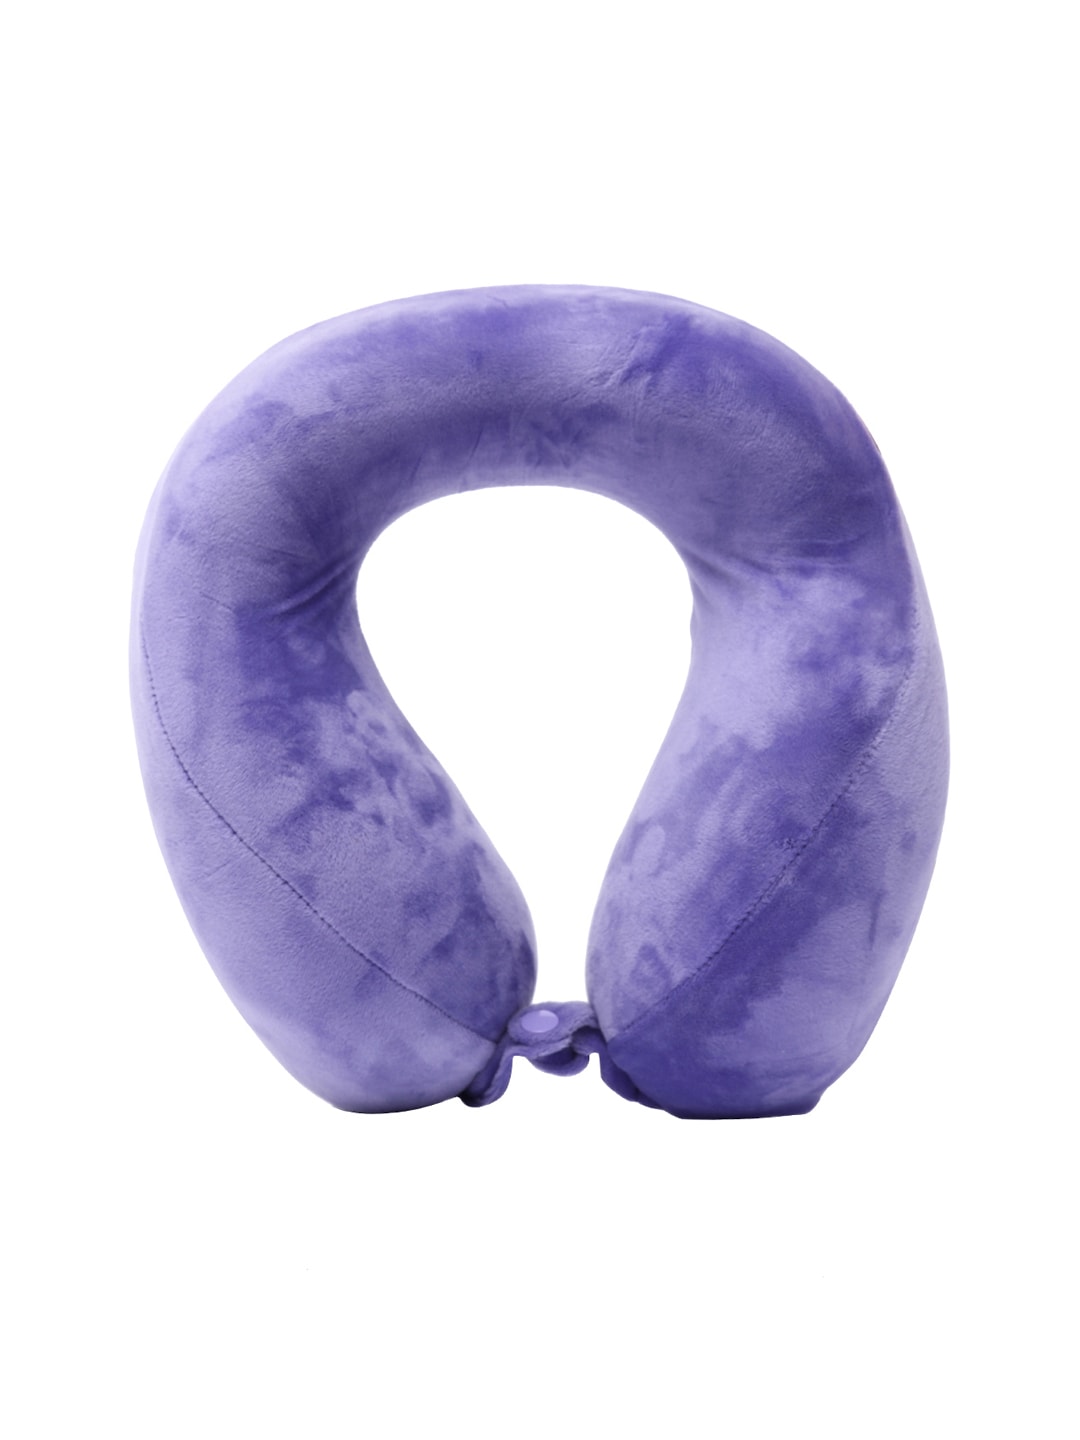 Travel Blue Purple Solid ranquility Memory Foam Foldable Travel Pillow Price in India